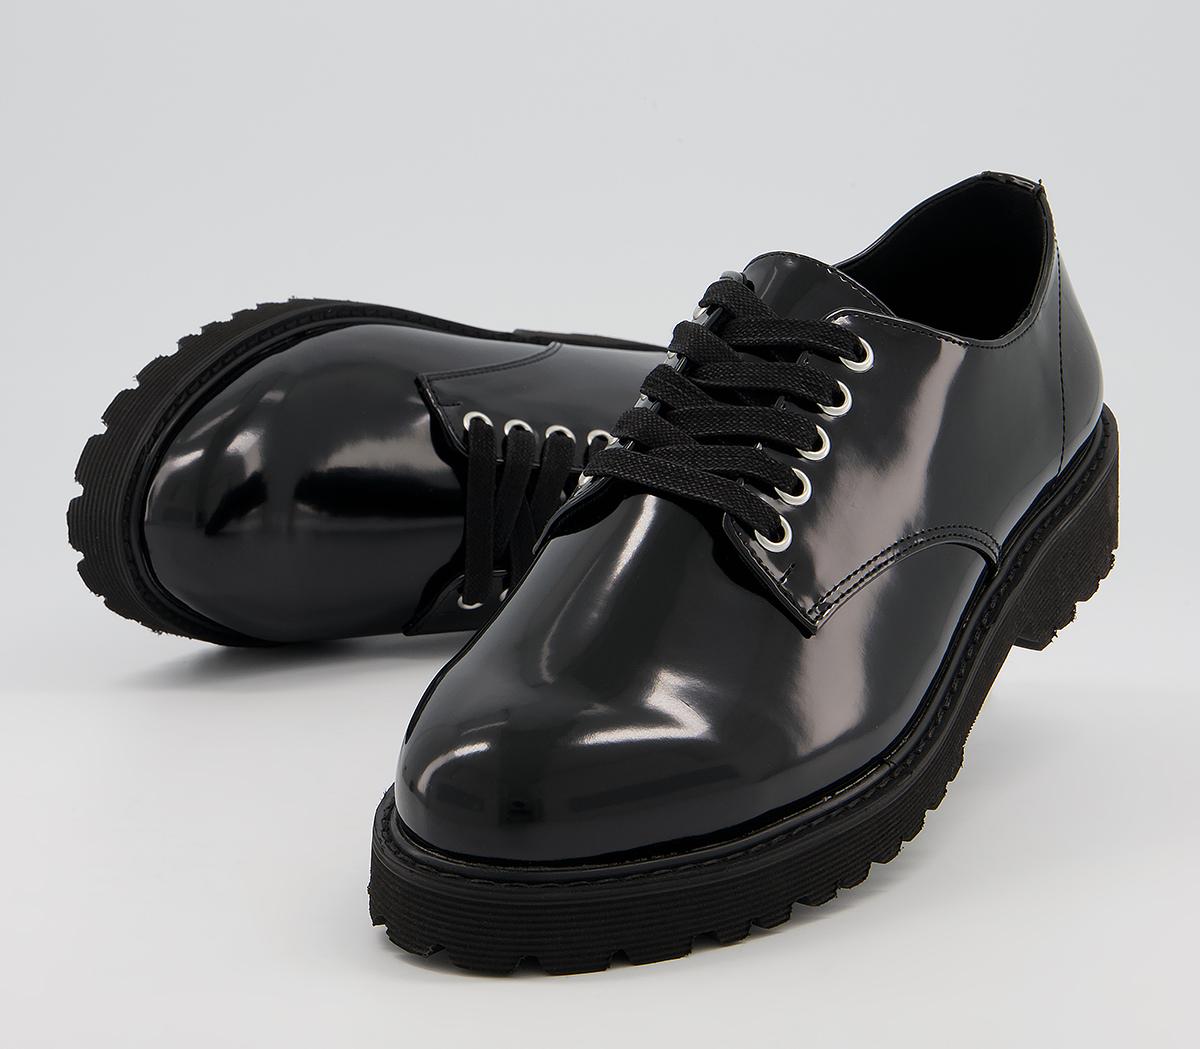 OFFICE Fern Lace Up Flats Black Patent - Flat Shoes for Women